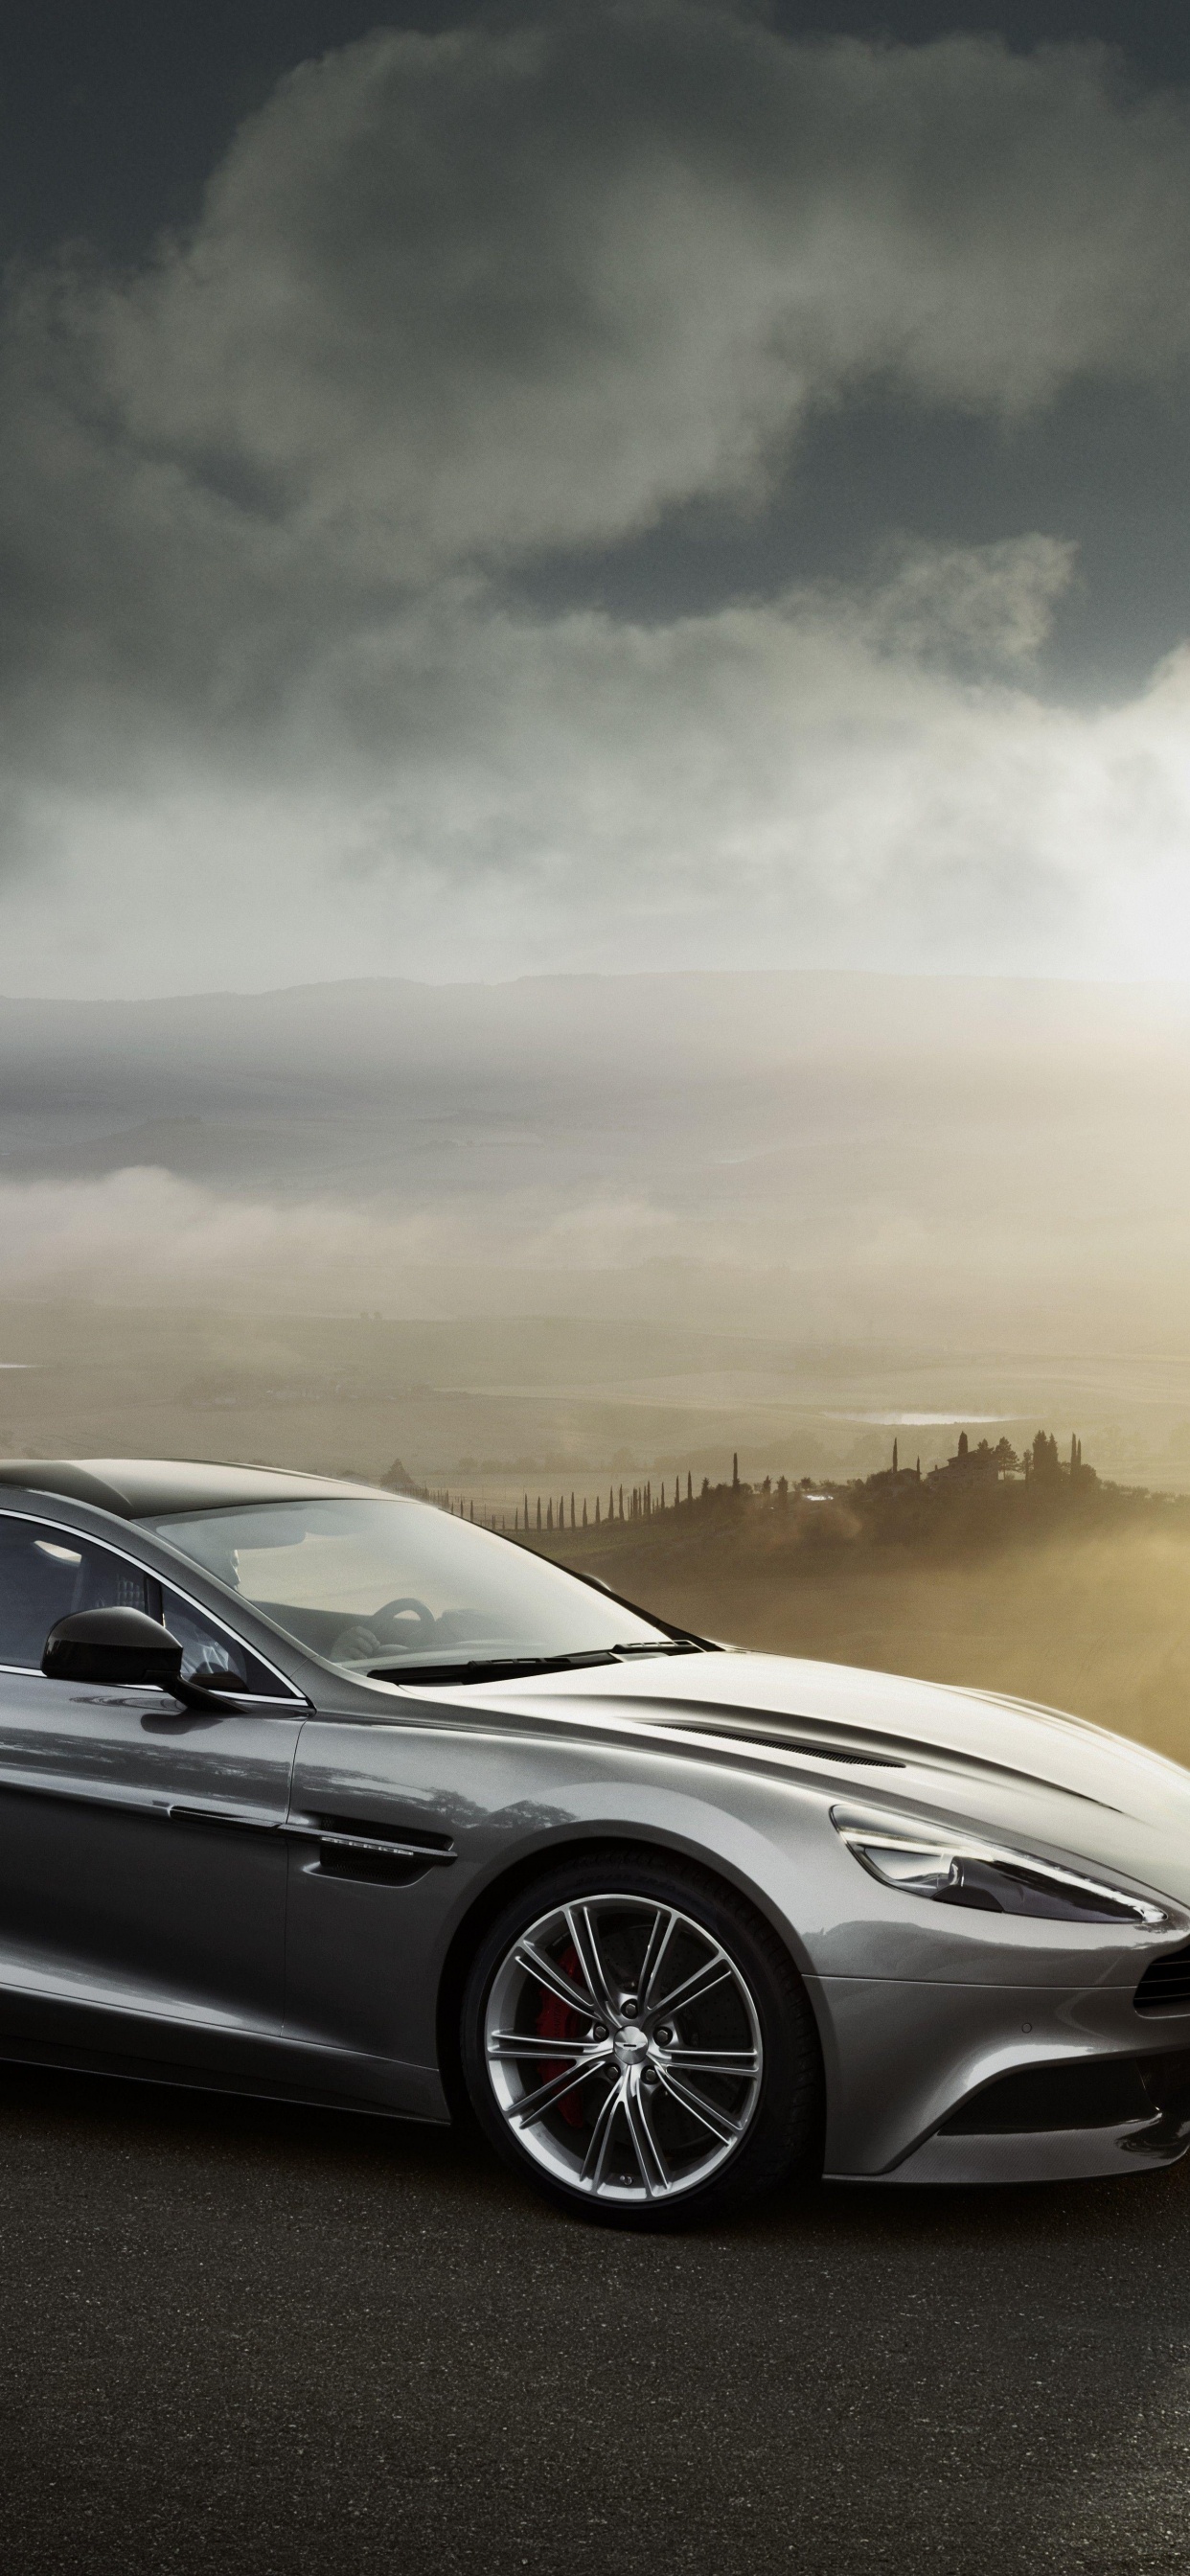 Gray Mercedes Benz Coupe on Road During Sunset. Wallpaper in 1242x2688 Resolution